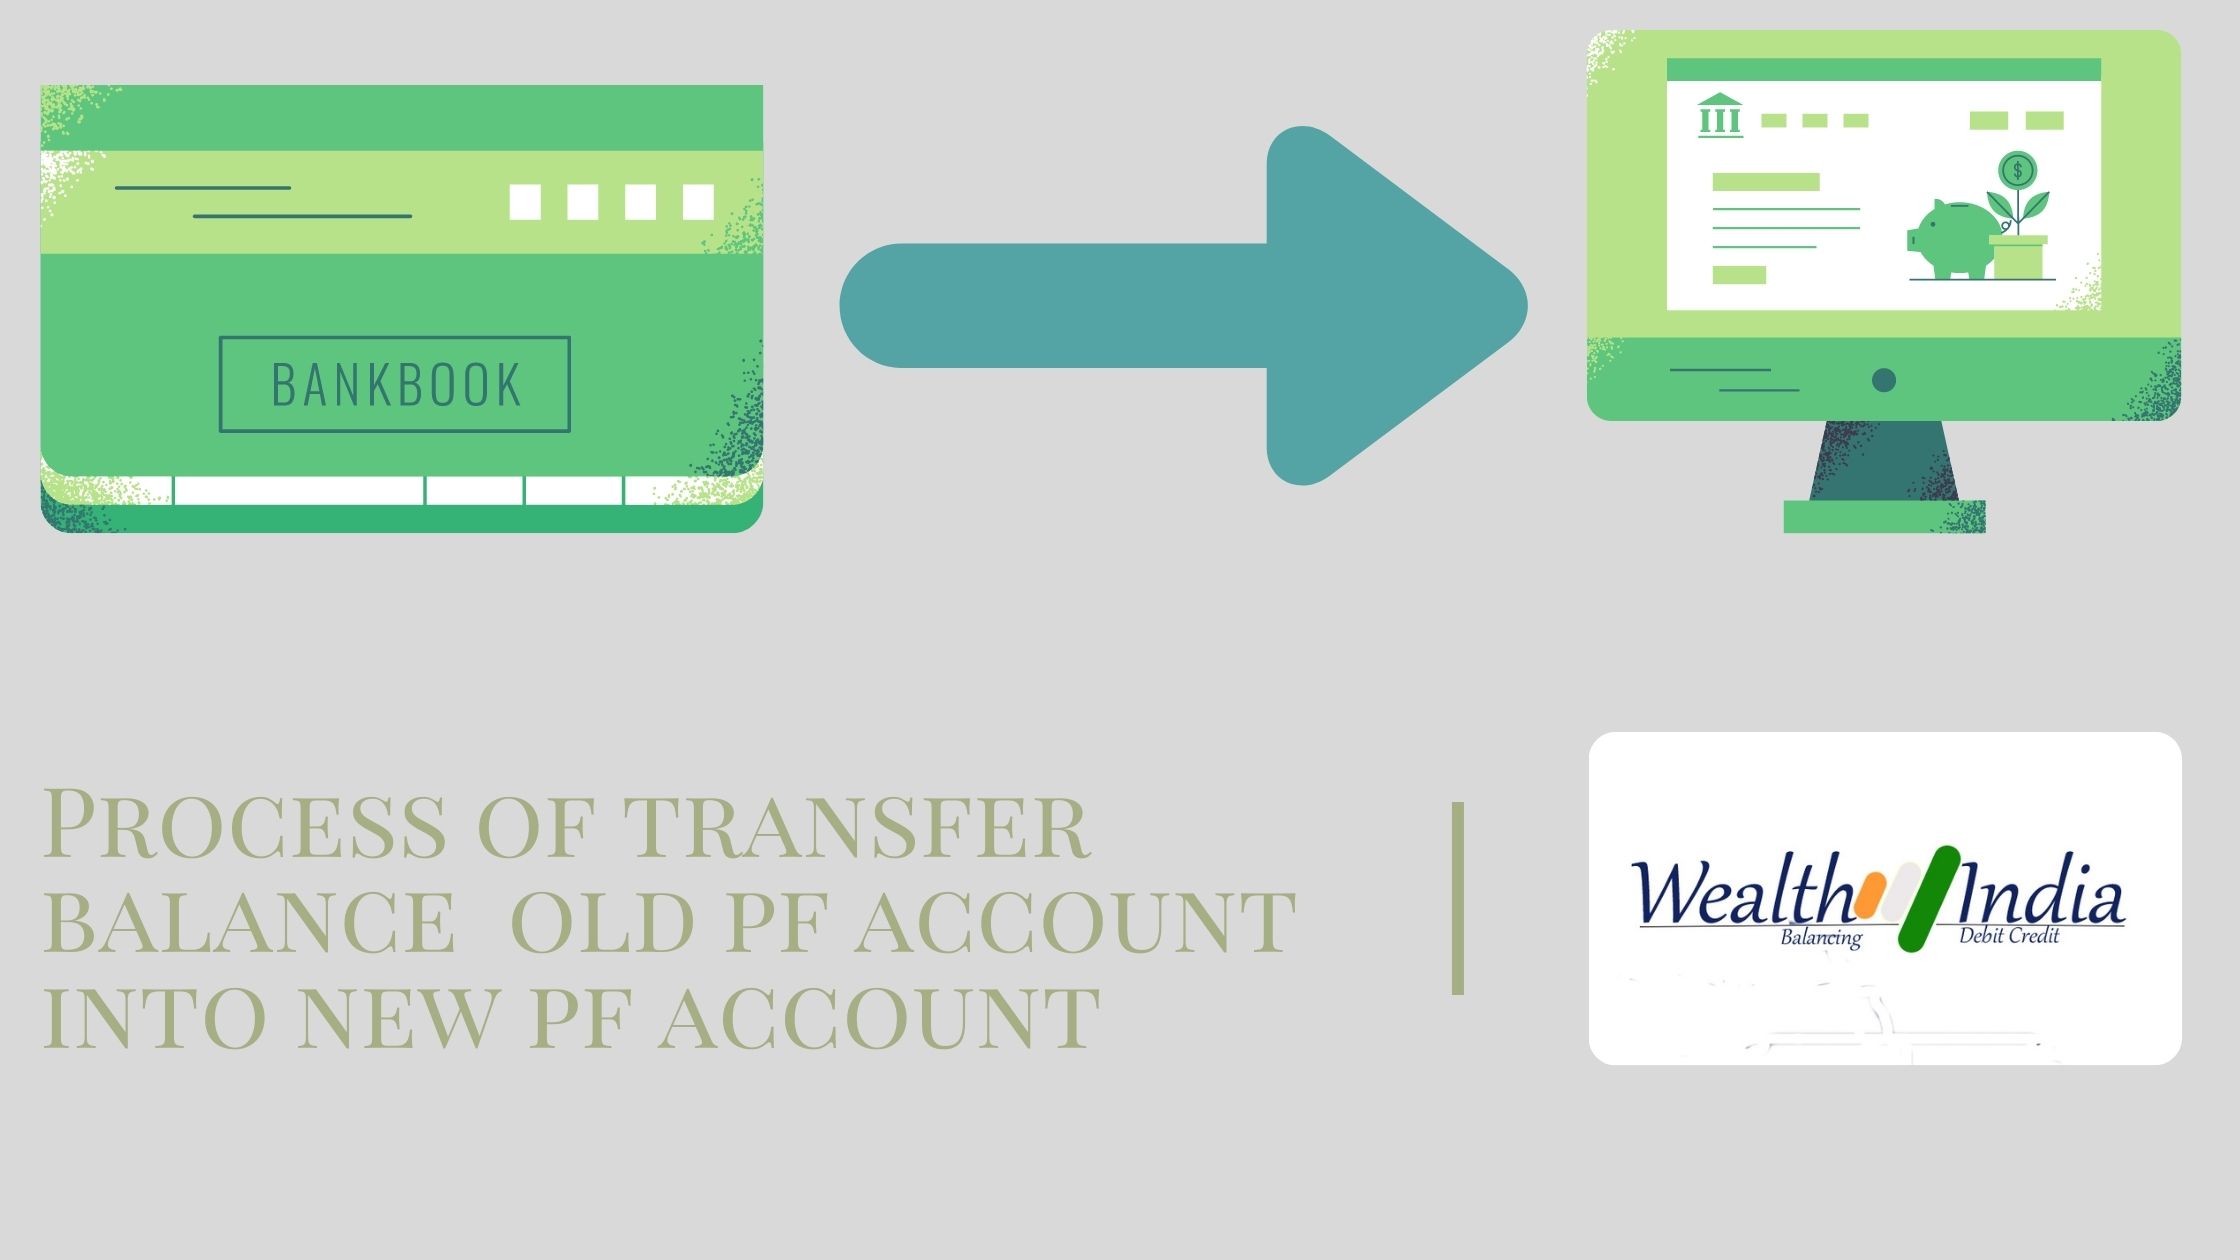 How to transfer old pf account balance to new pf account?